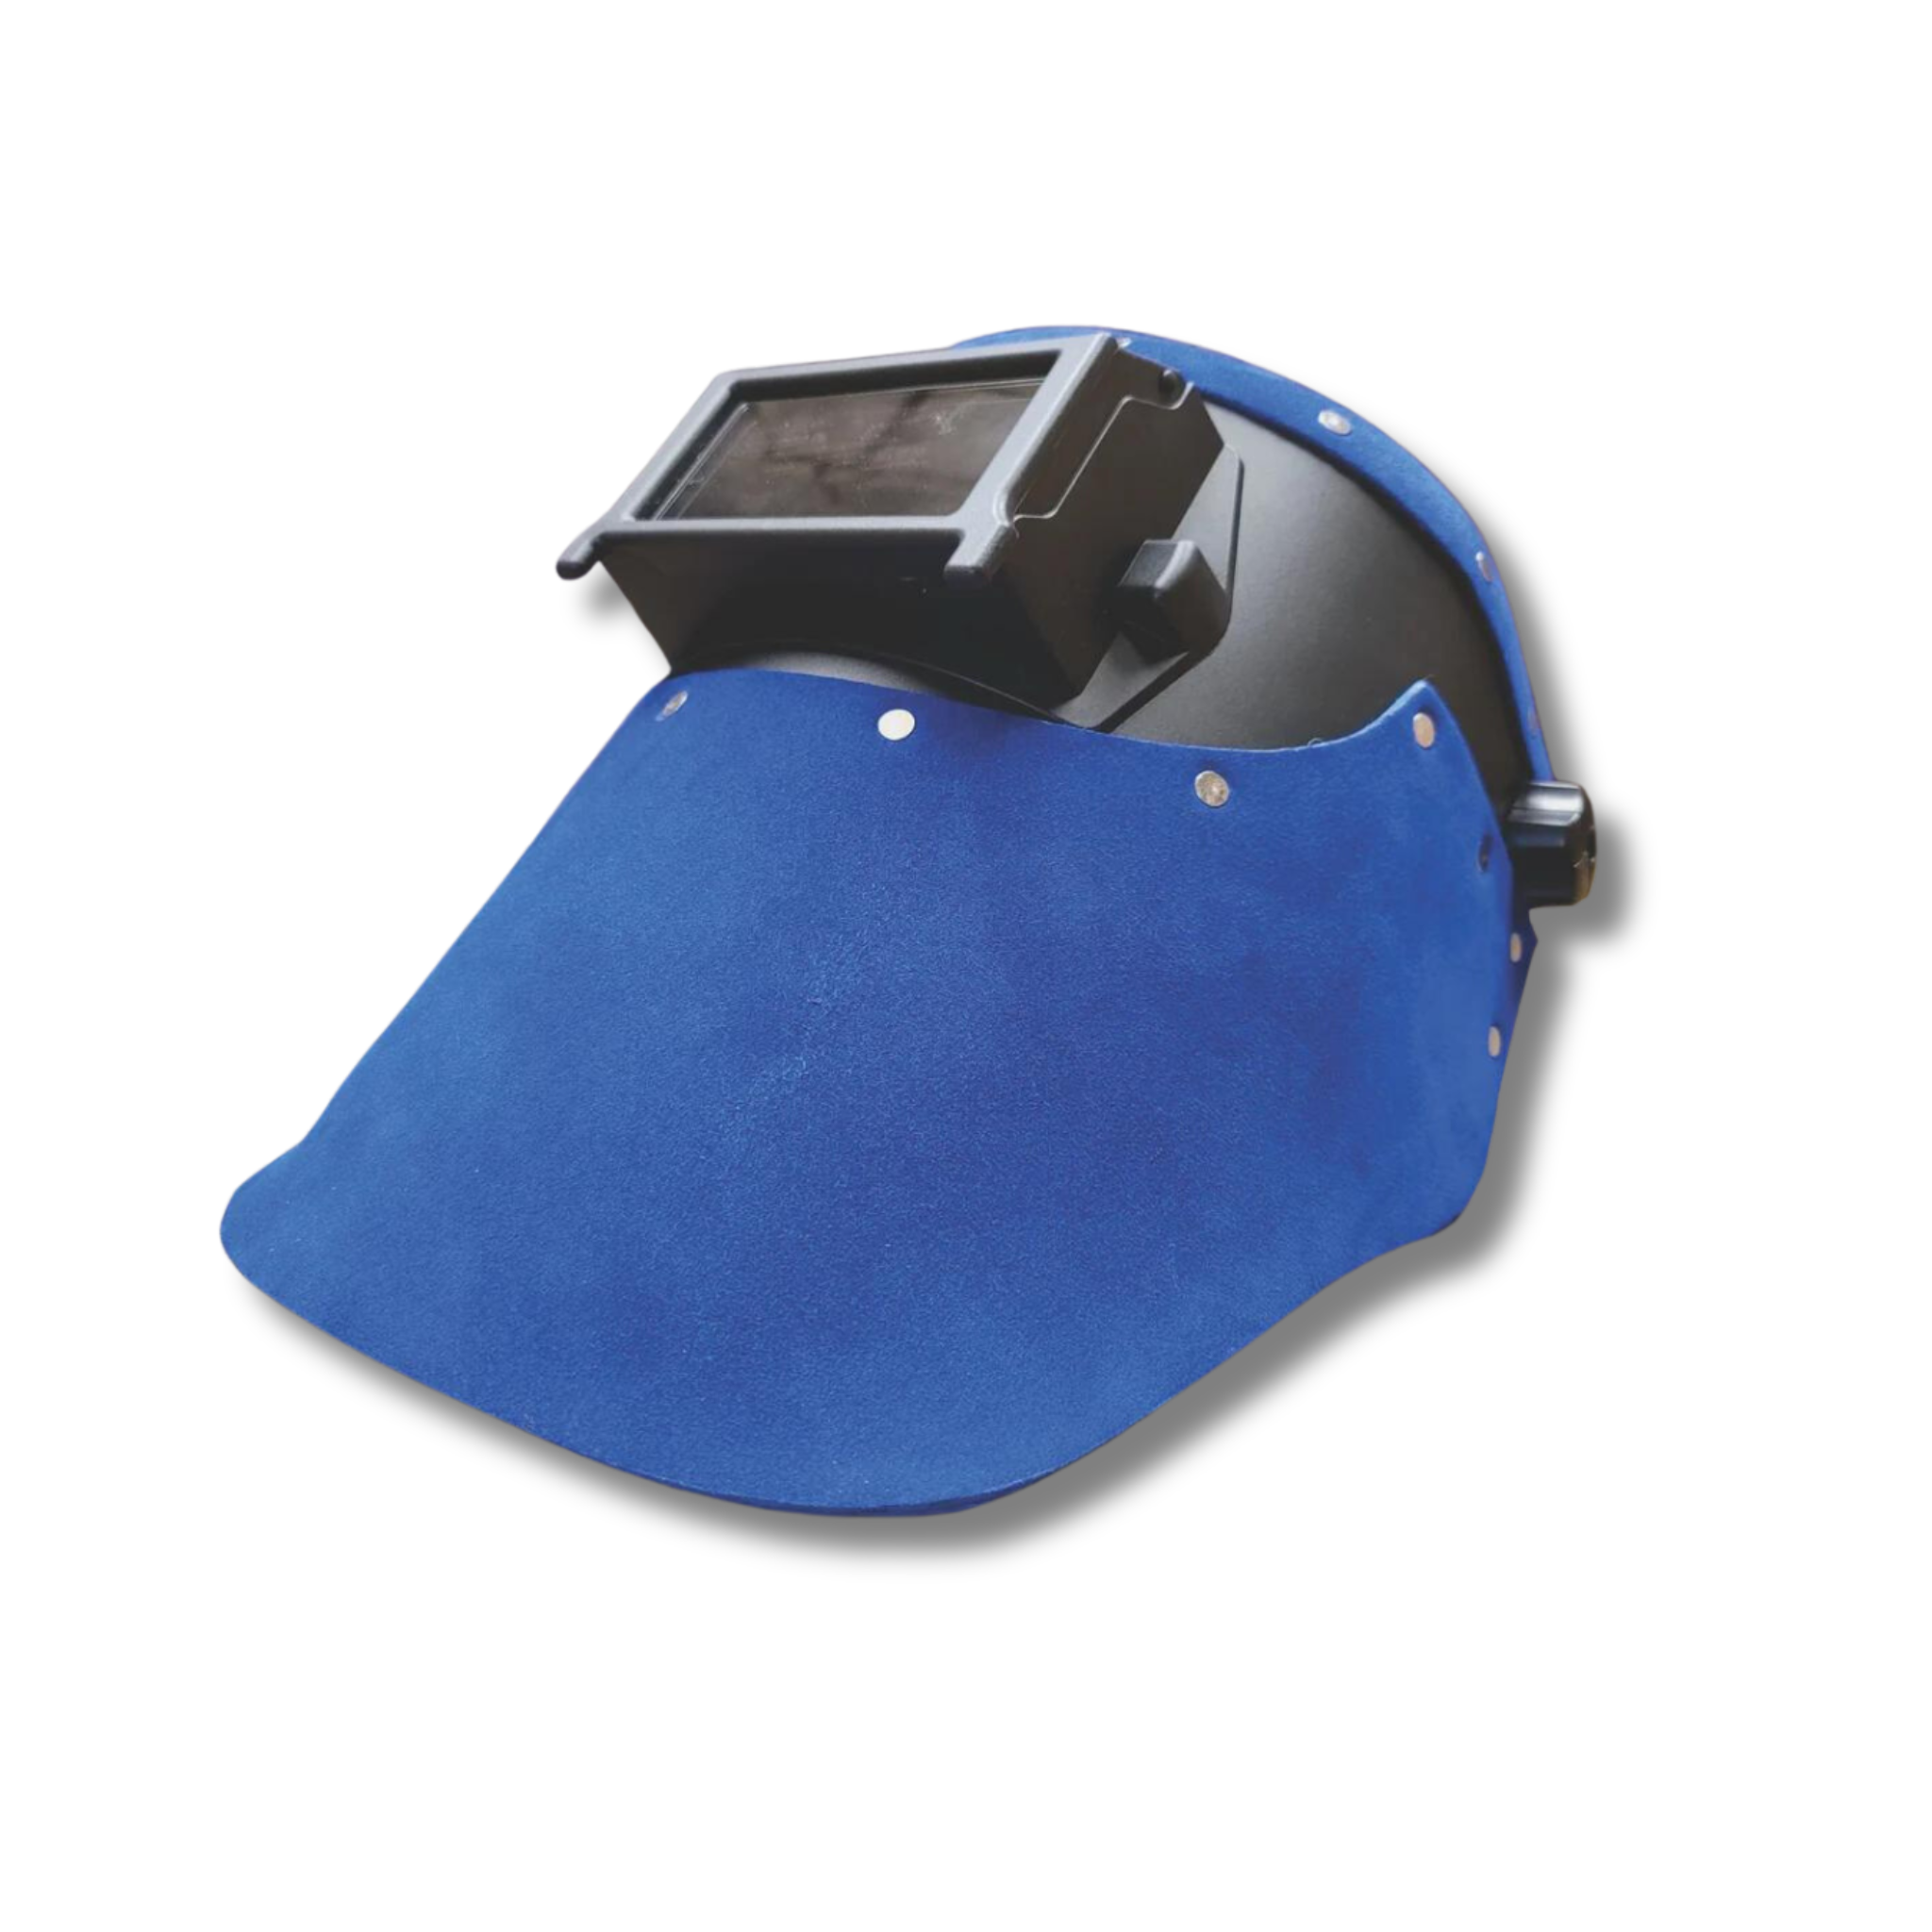 Outlaw Leather - Welding Hood - Royal Suede